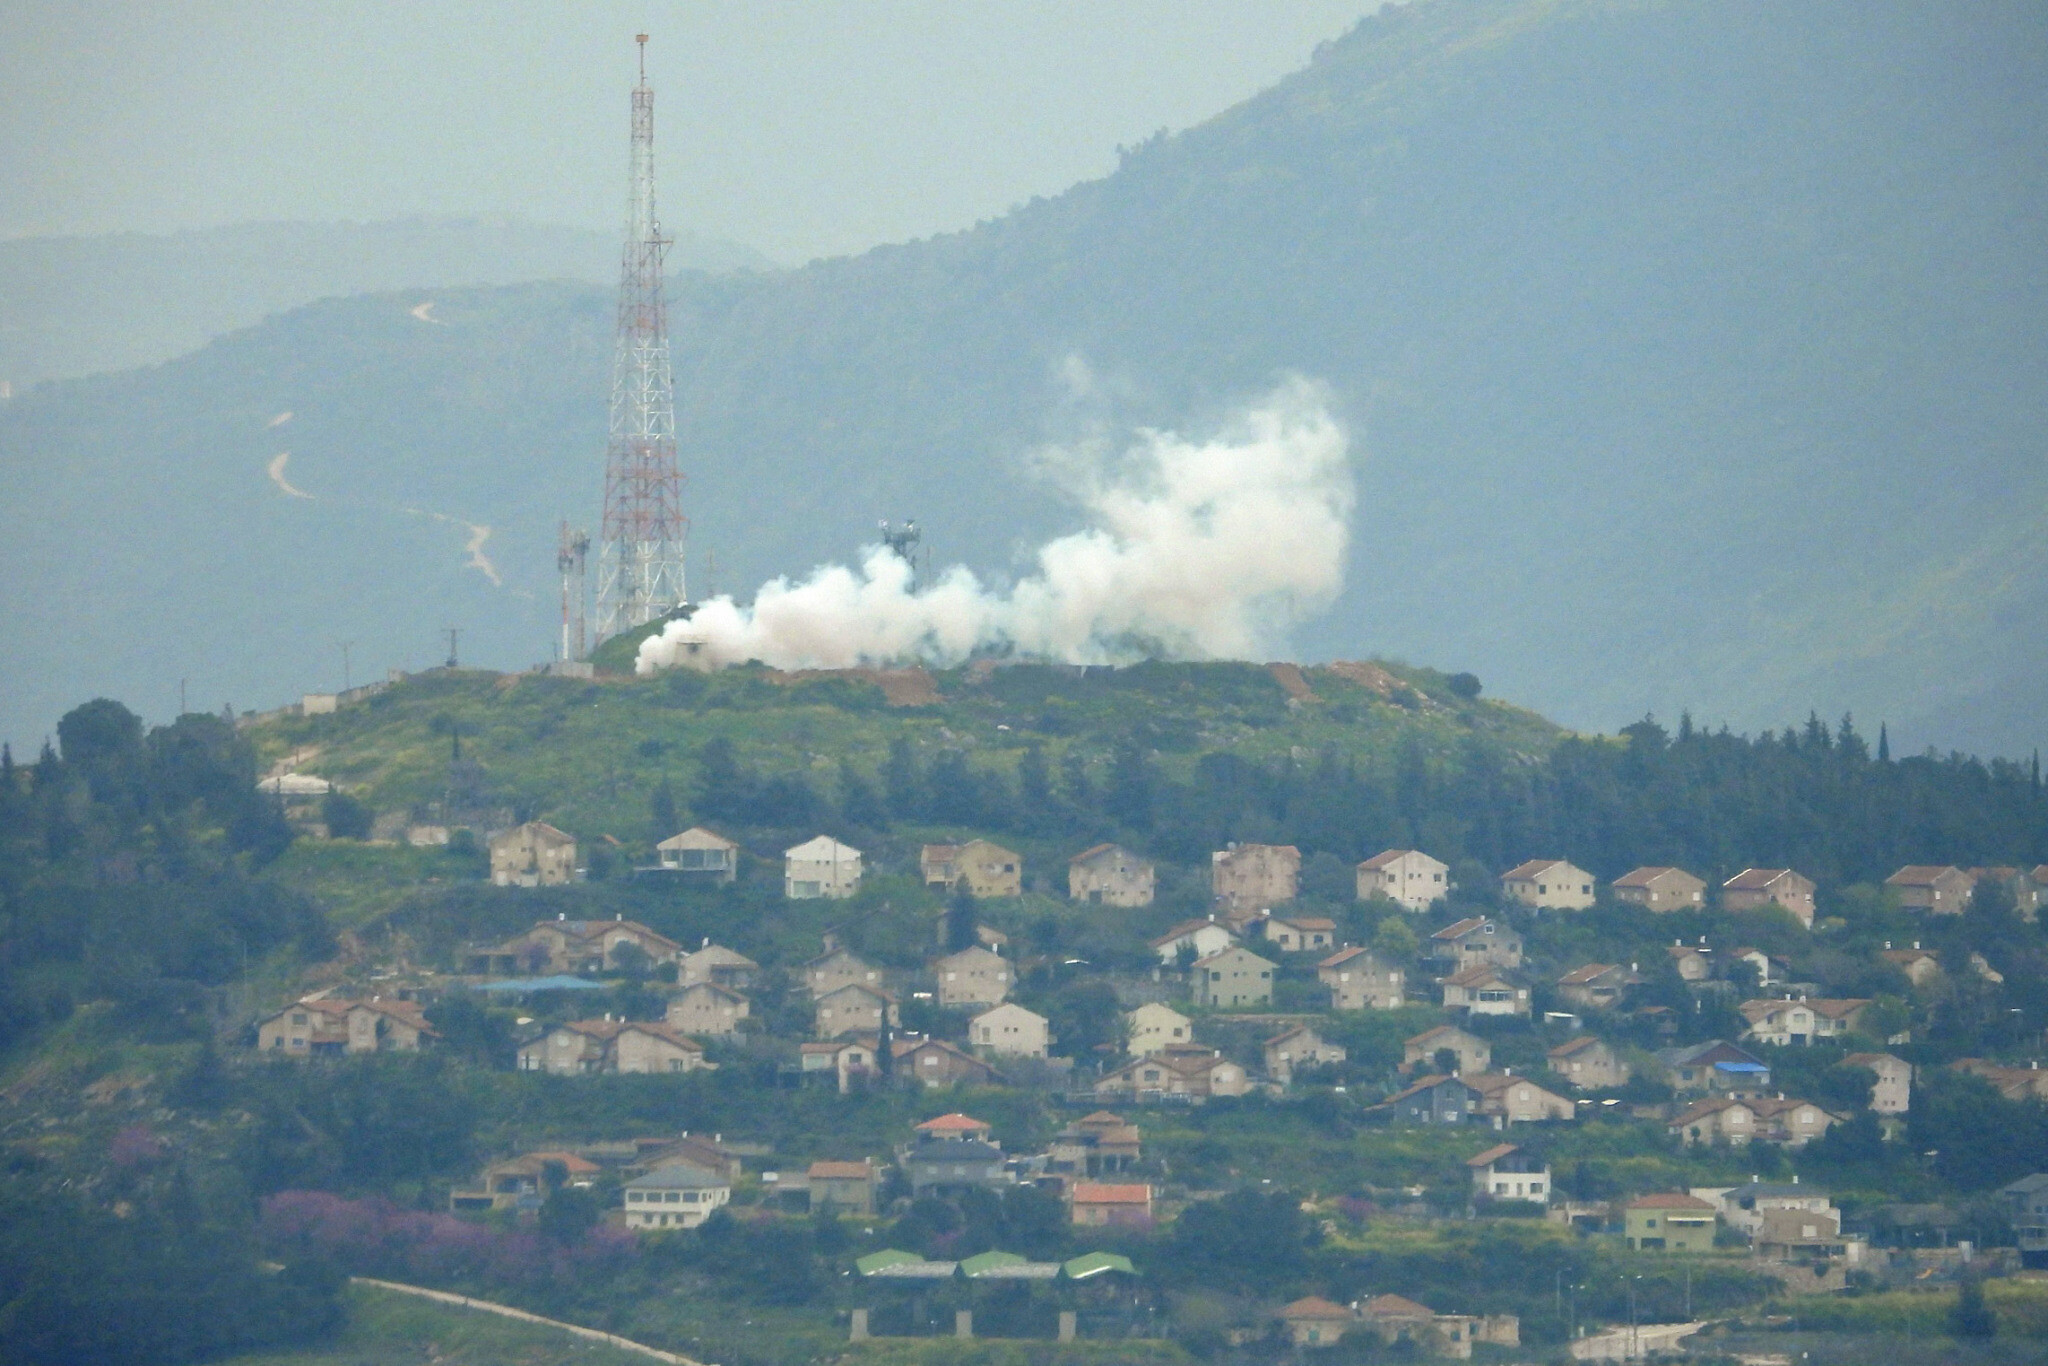 IDF jets strike Hezbollah cell in south Lebanon after projectiles hit northern town